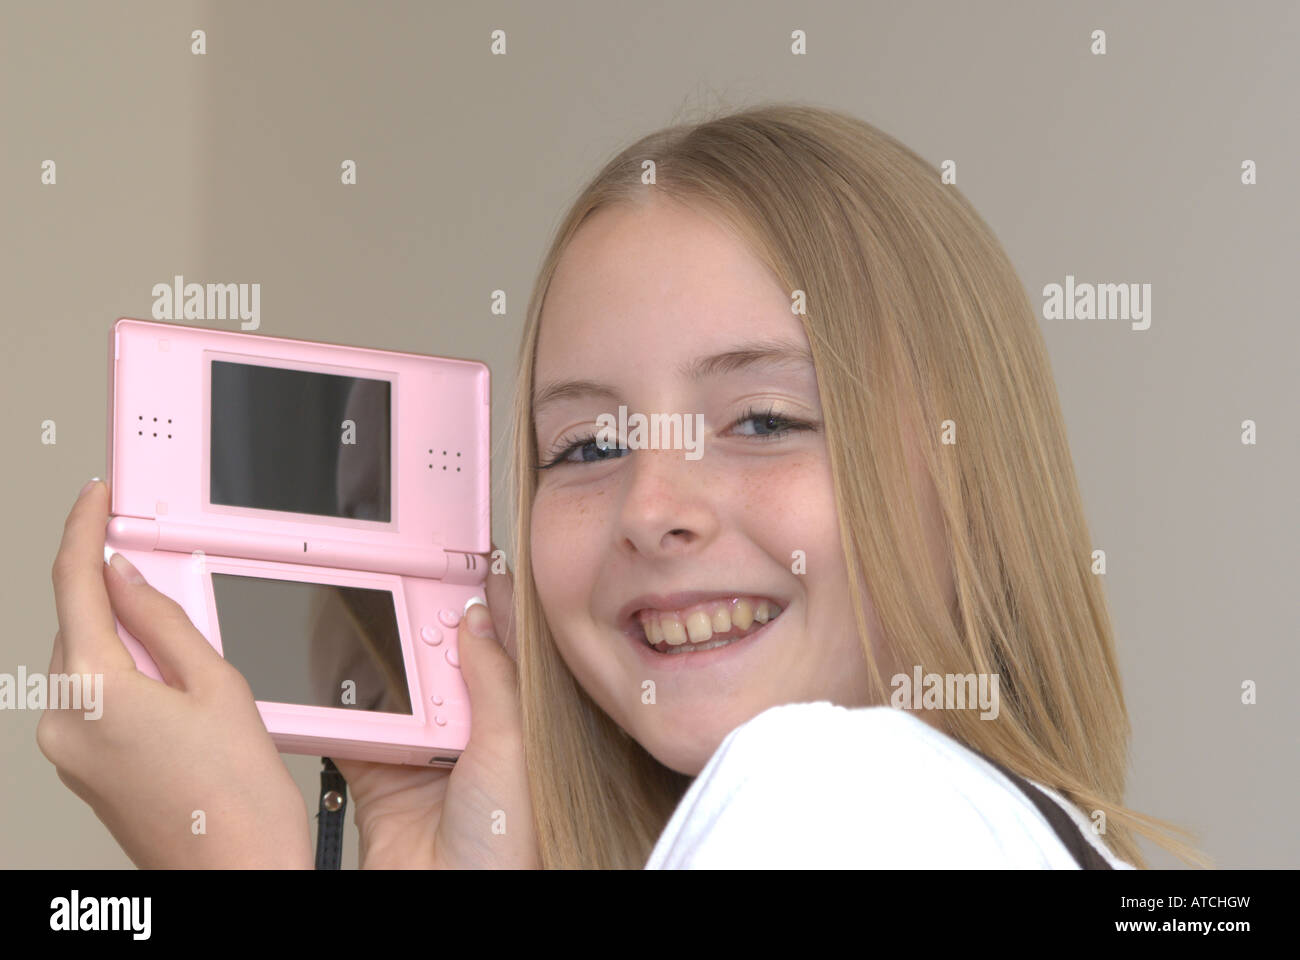 Young girl holding a Nintendo DS lite game console UK Stock Photo